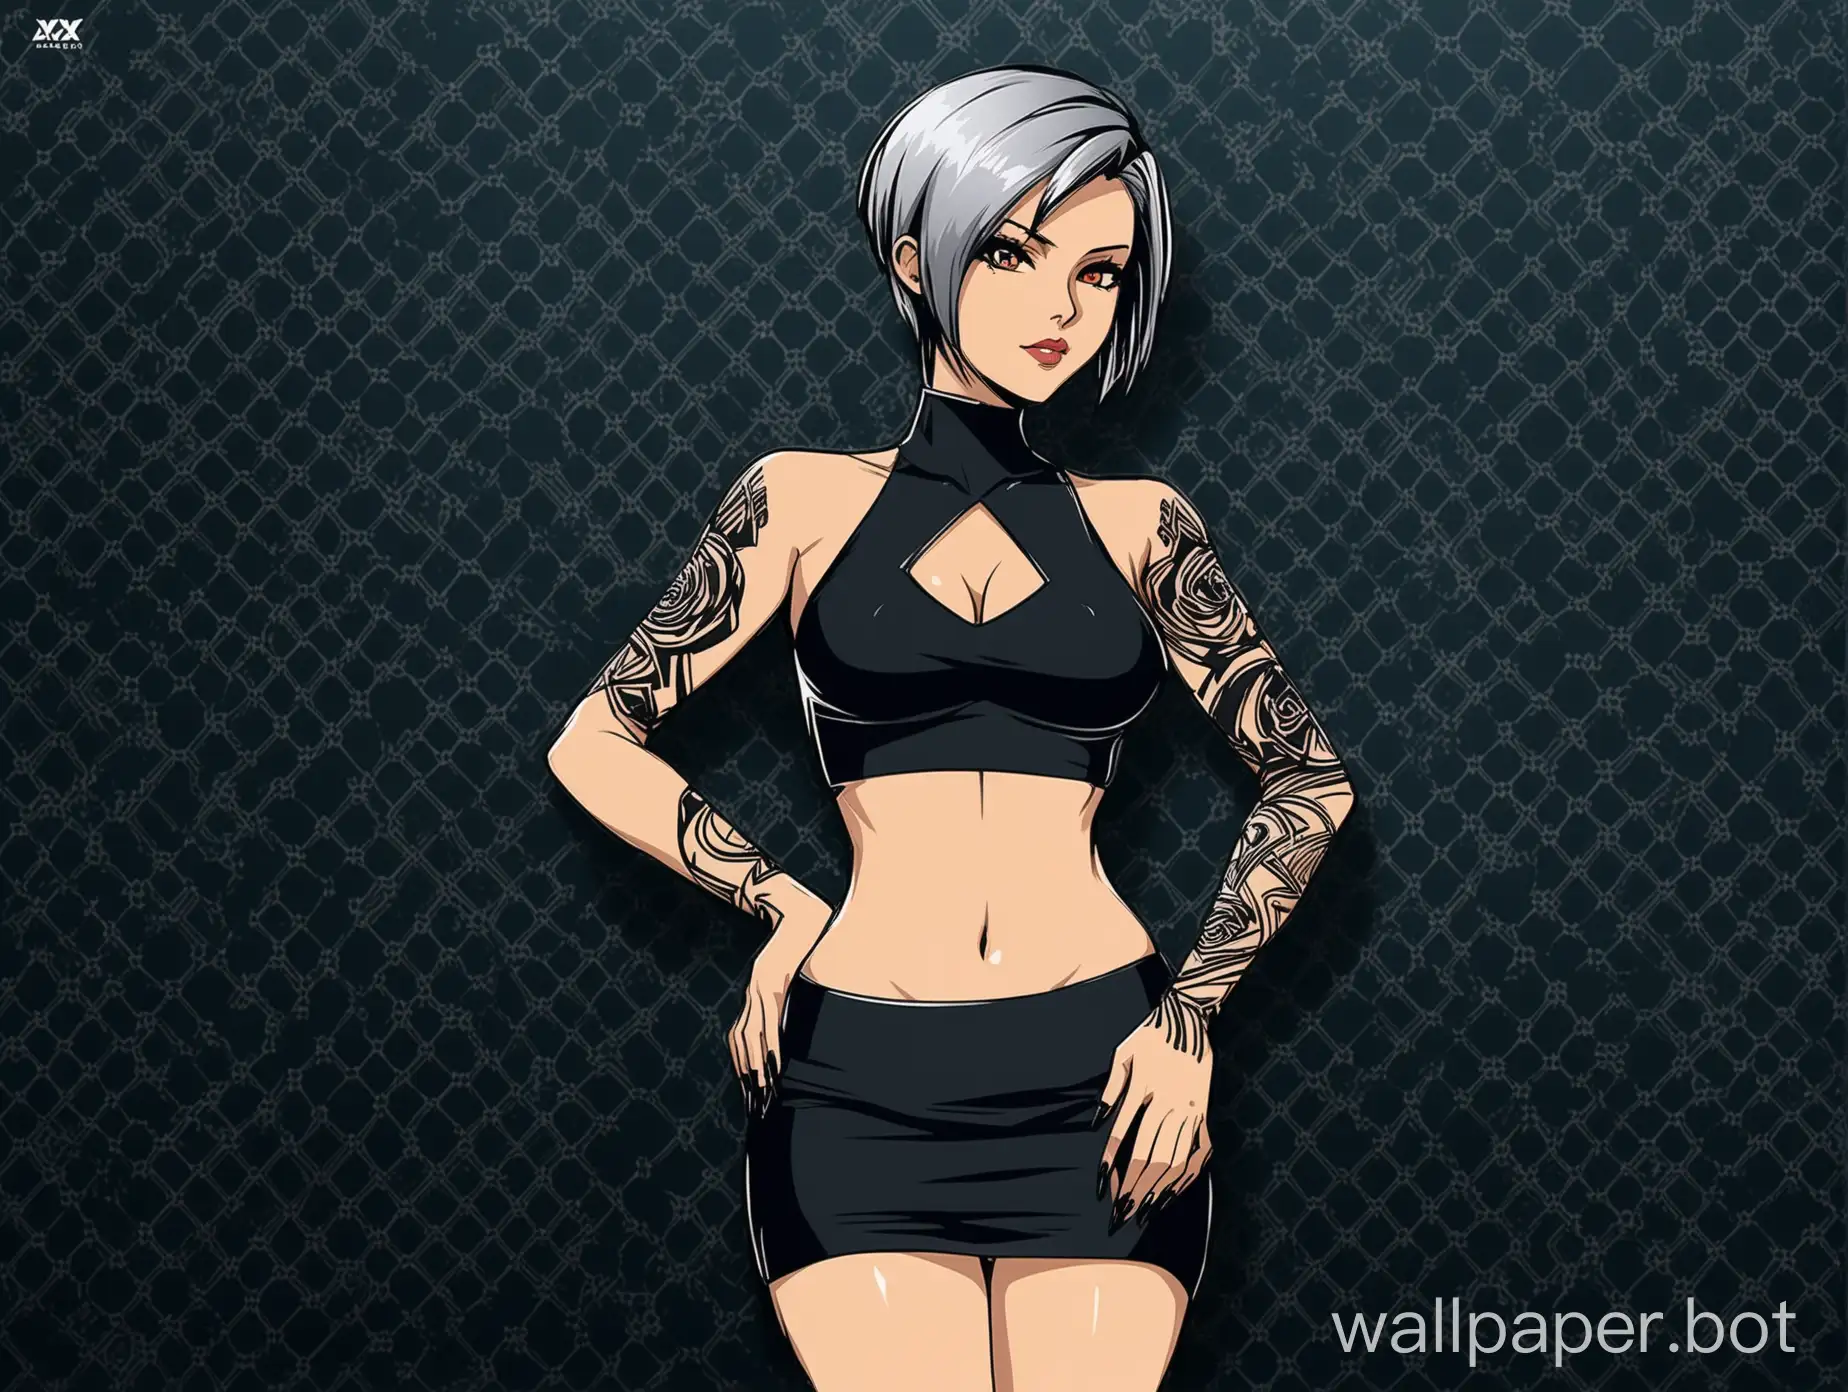 Design a captivating wallpaper featuring a sultry anime female character with a short silver hairstyle similar to Ruby Rose's character in 'XXX Return of Xander Cage'. The character should exude confidence and charisma, with a seductive yet edgy look that reflects her personality. Her silver short hairstyle should be sleek and modern, adding to her bold and dynamic appearance. Dress her in a fitted crop top with strategic cut-outs that accentuate her curvy physique, paired with a sleek bodycon skirt that hugs her figure. Enhance her sexiness with subtle yet alluring poses and expressions. Incorporate elements of Arch Linux, such as the logo or color scheme, into the background or accessories to give the wallpaper a tech-inspired edge. The background should be monochromatic, clean, and mineralistic, with subtle textures to add depth and interest while maintaining a minimalist aesthetic."